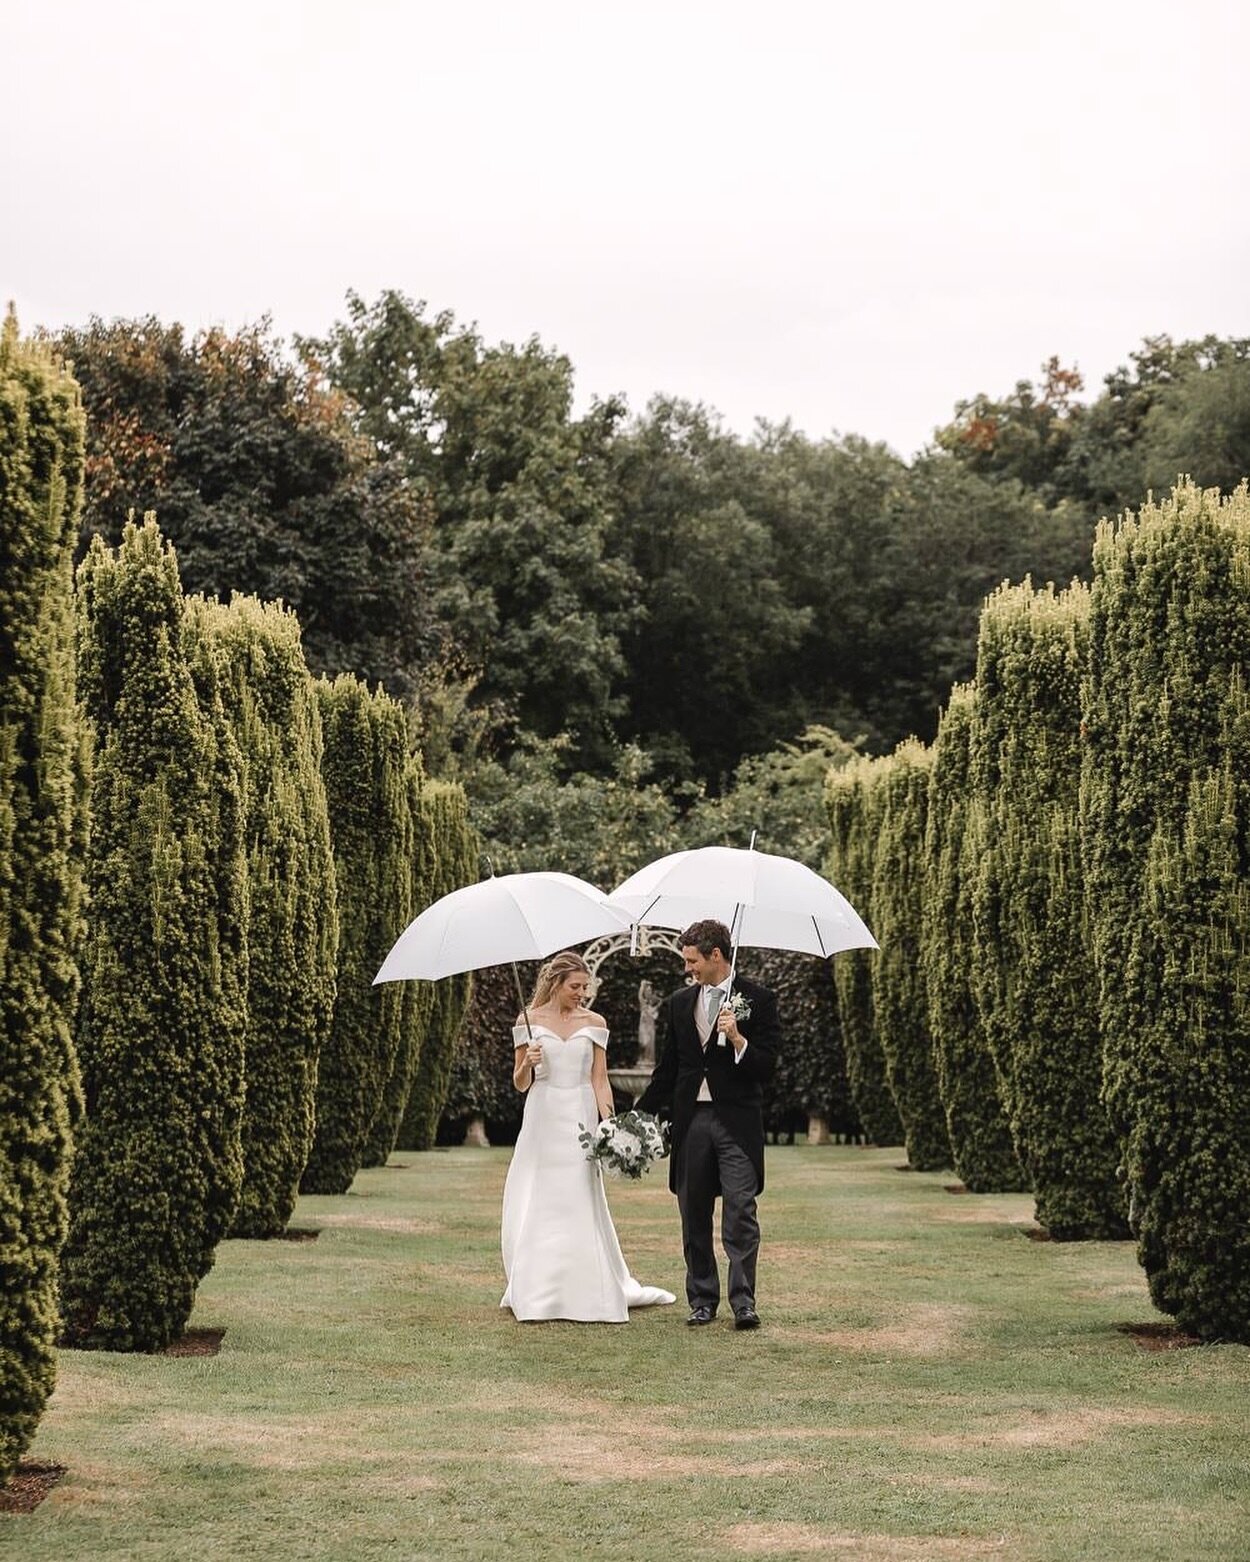 &ldquo;The best things in life are the people you love, the places you go, and the memories you make.&rdquo; 
 
#relaxedweddingphotography #cheshirewedding #holfordestatewedding #cheshireweddingphotographer #realweddingmoments